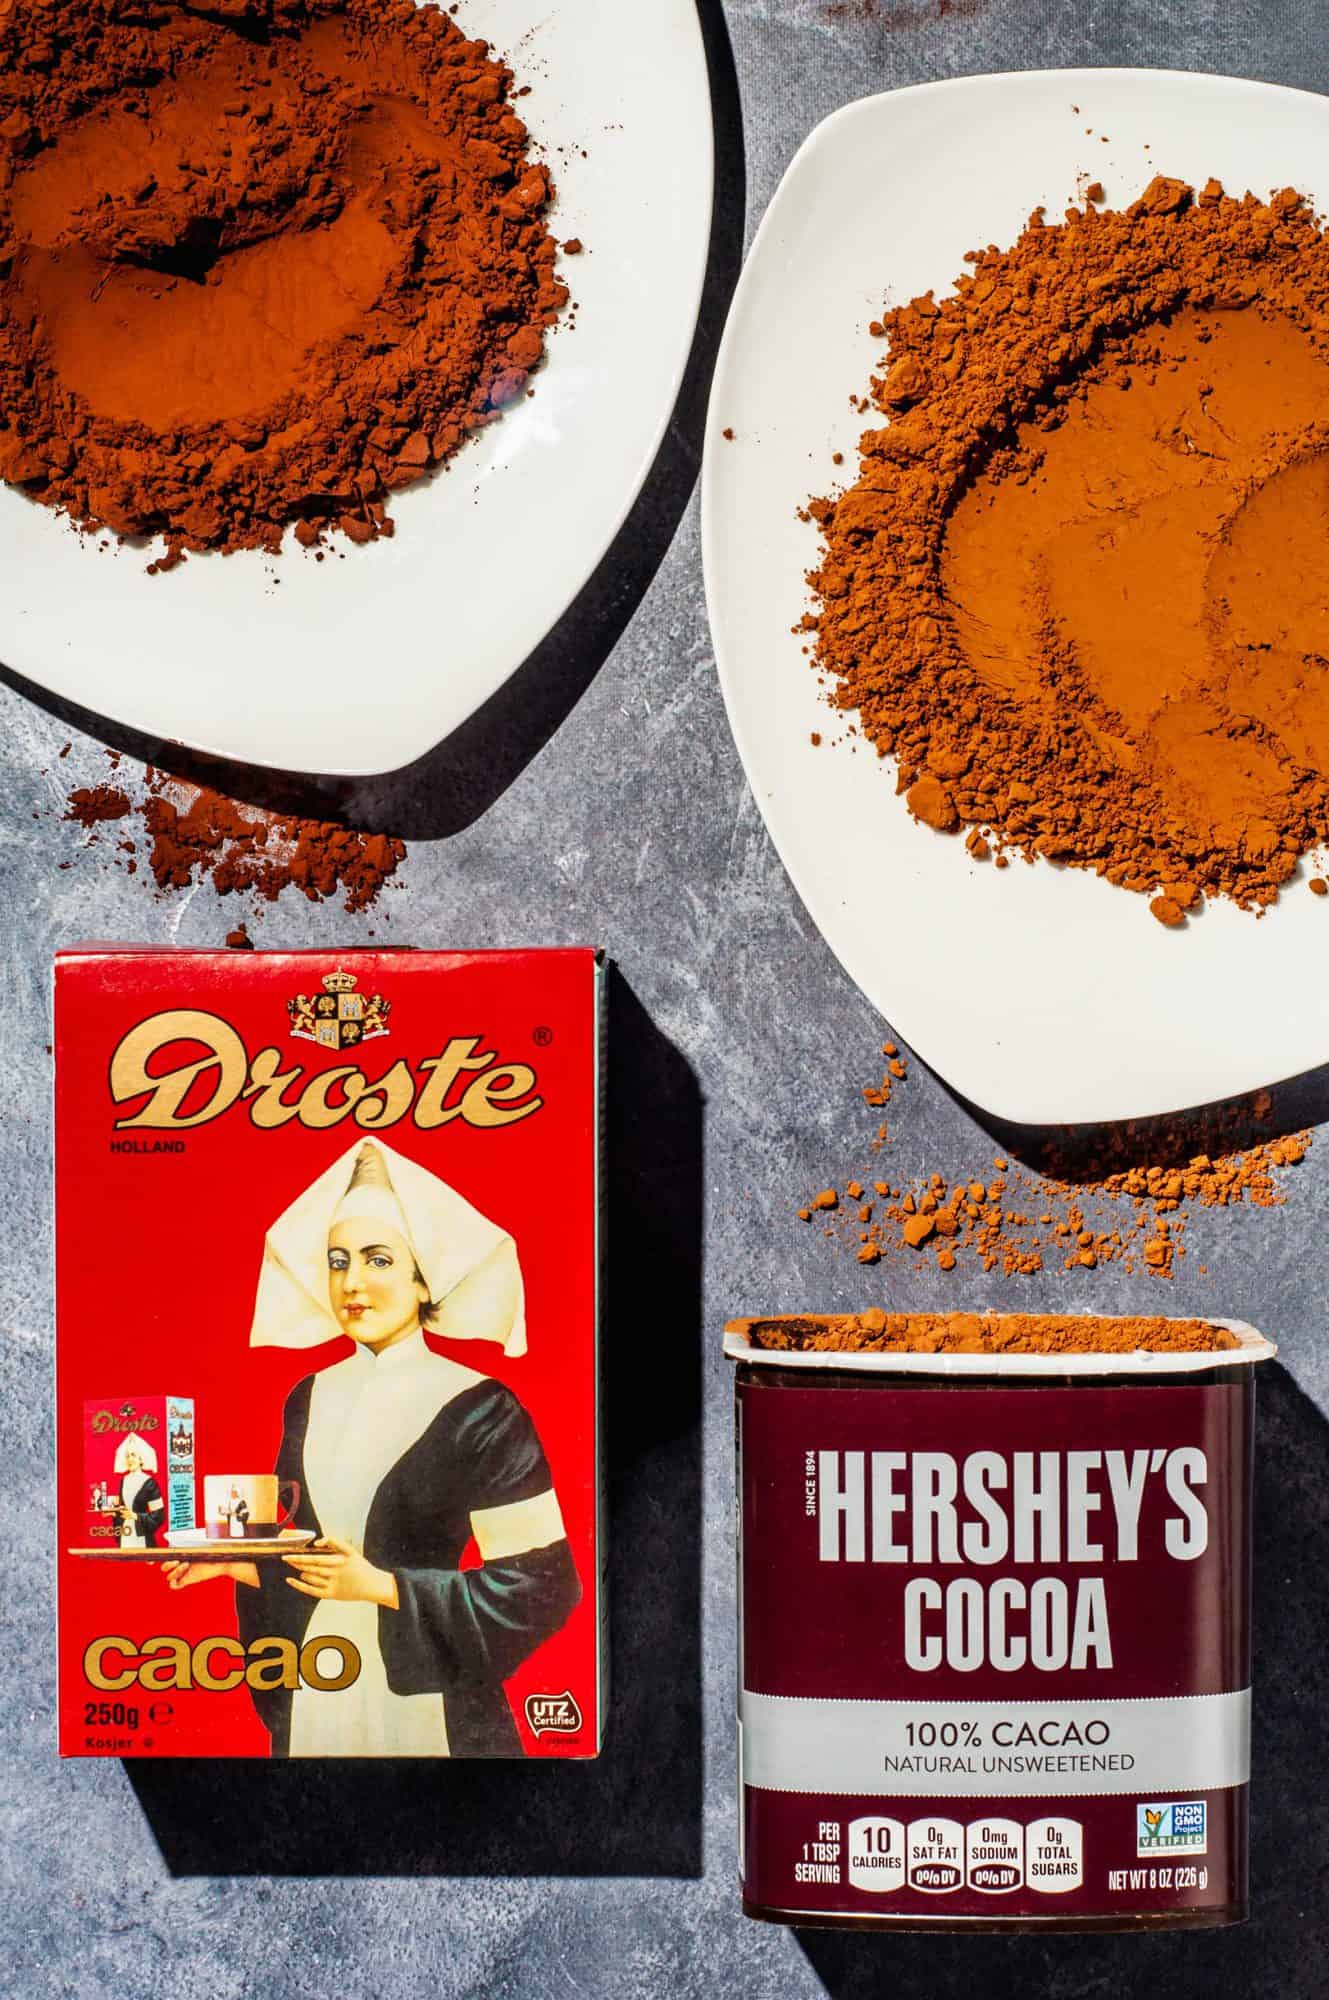 Droste cocoa powder packaging and Hershey's cocoa powder packaging with cocoa powder on white plates above packaging to show color difference. 